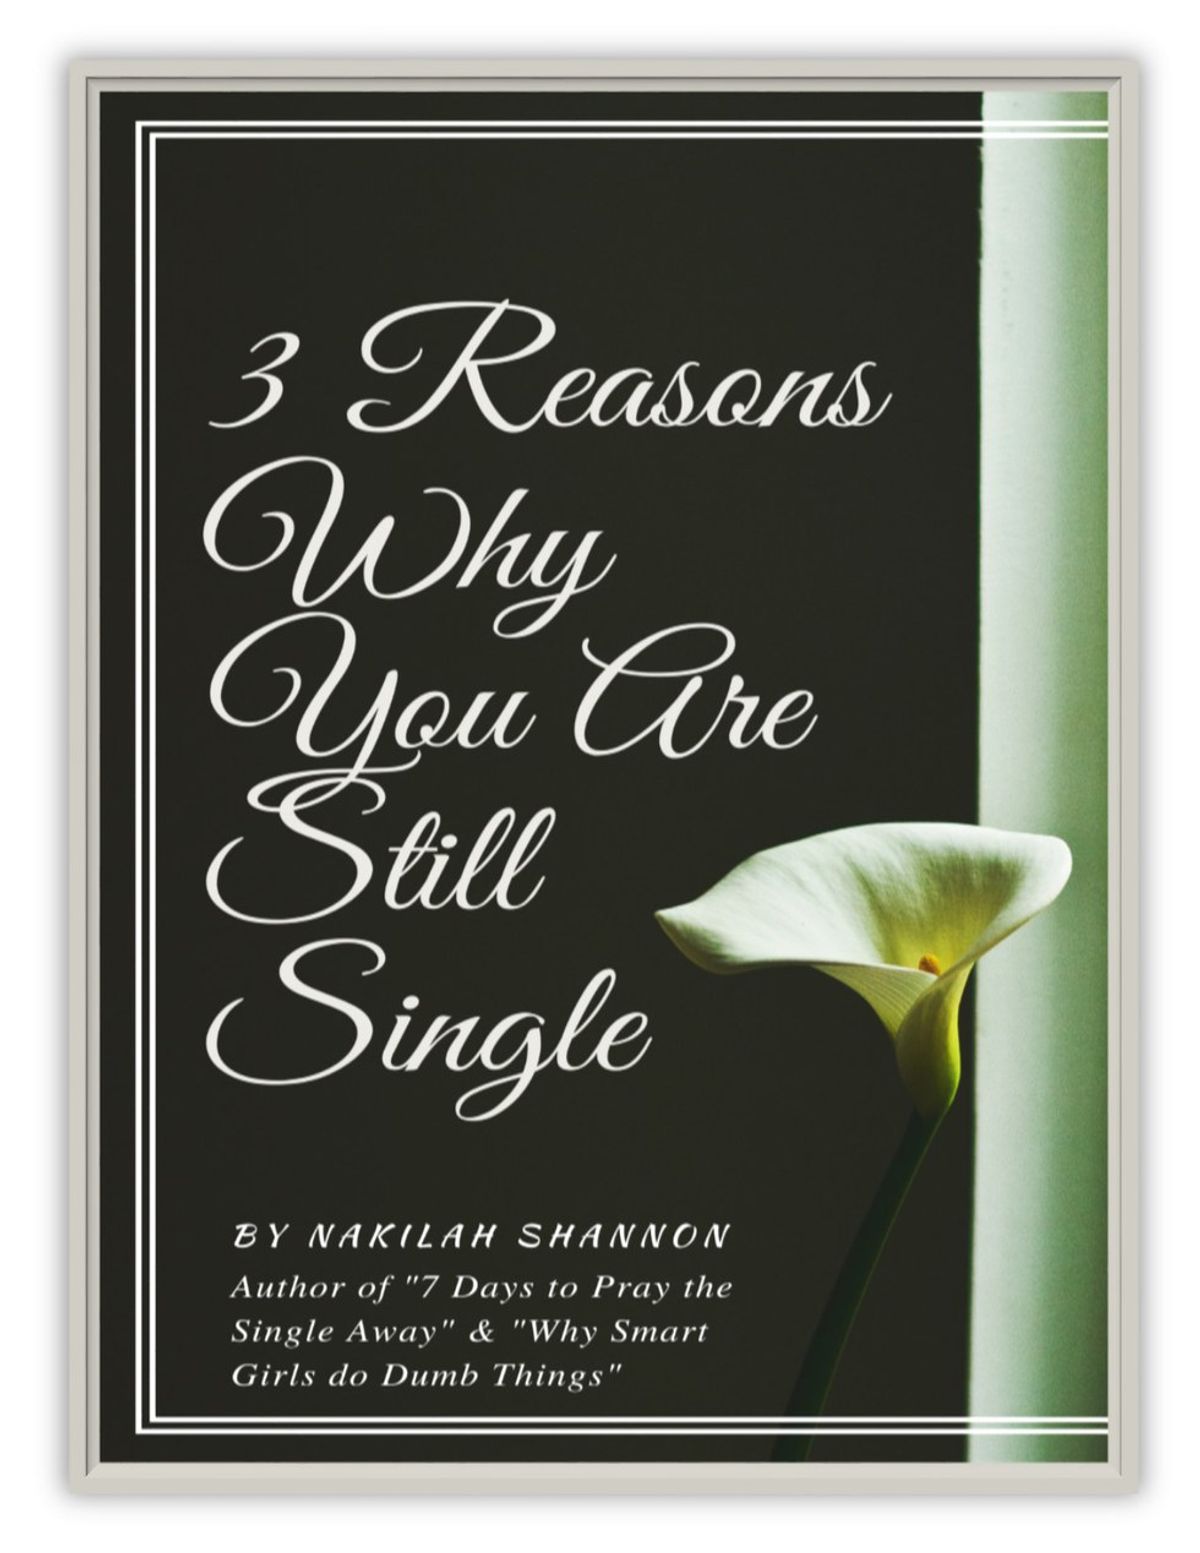 3 Reasons Why You are Still Single (part 1of 3)